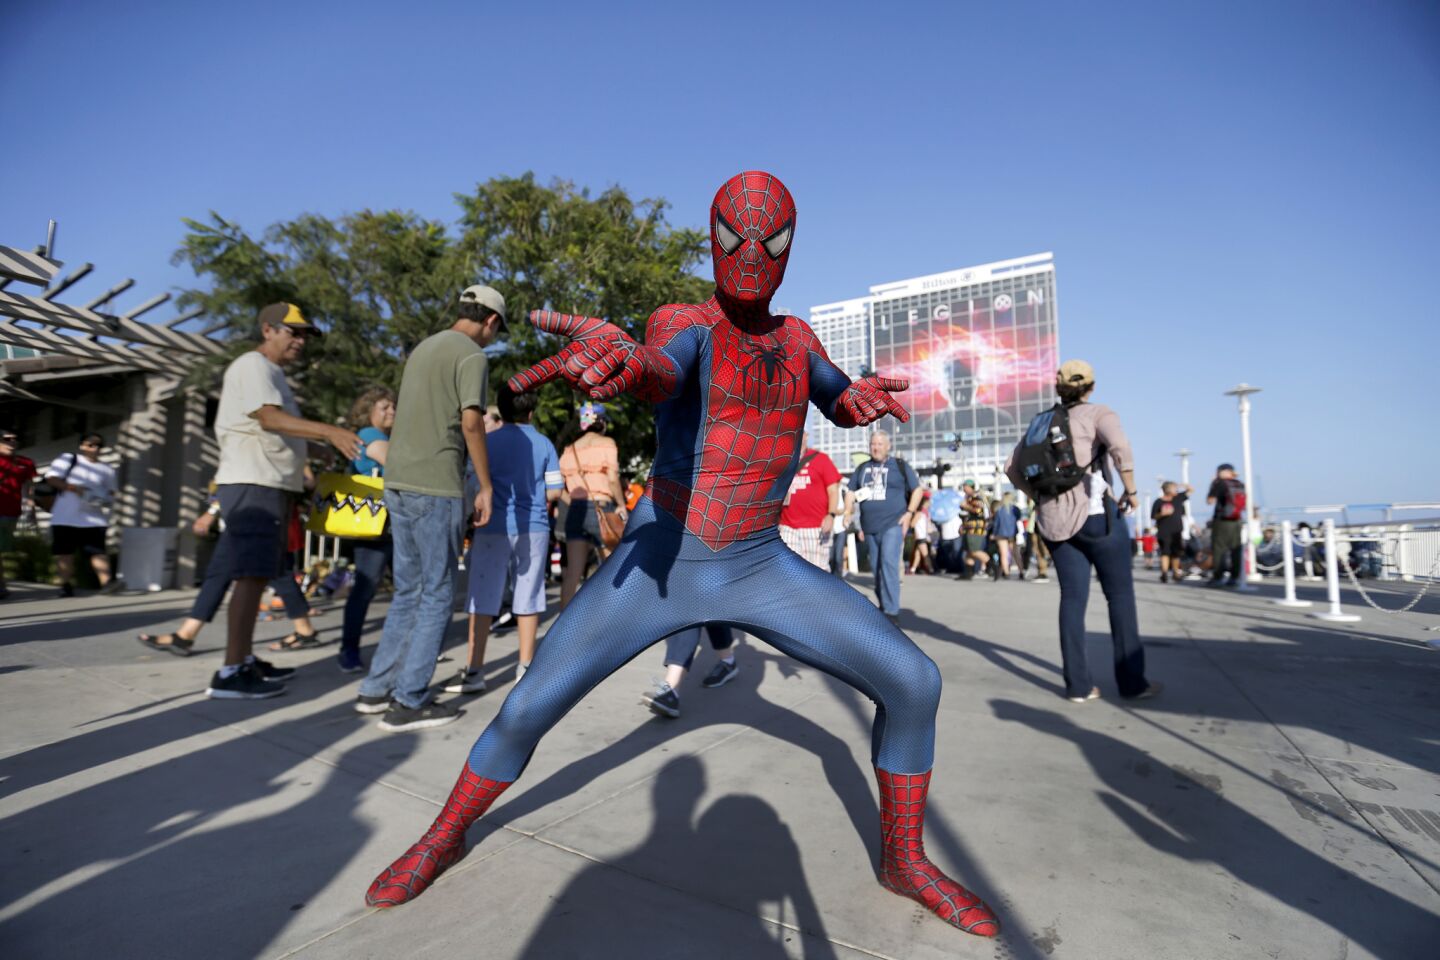 Daniel Mayeux of Anaheim strikes a pose in his Spider-Man costume at Comic-Con.